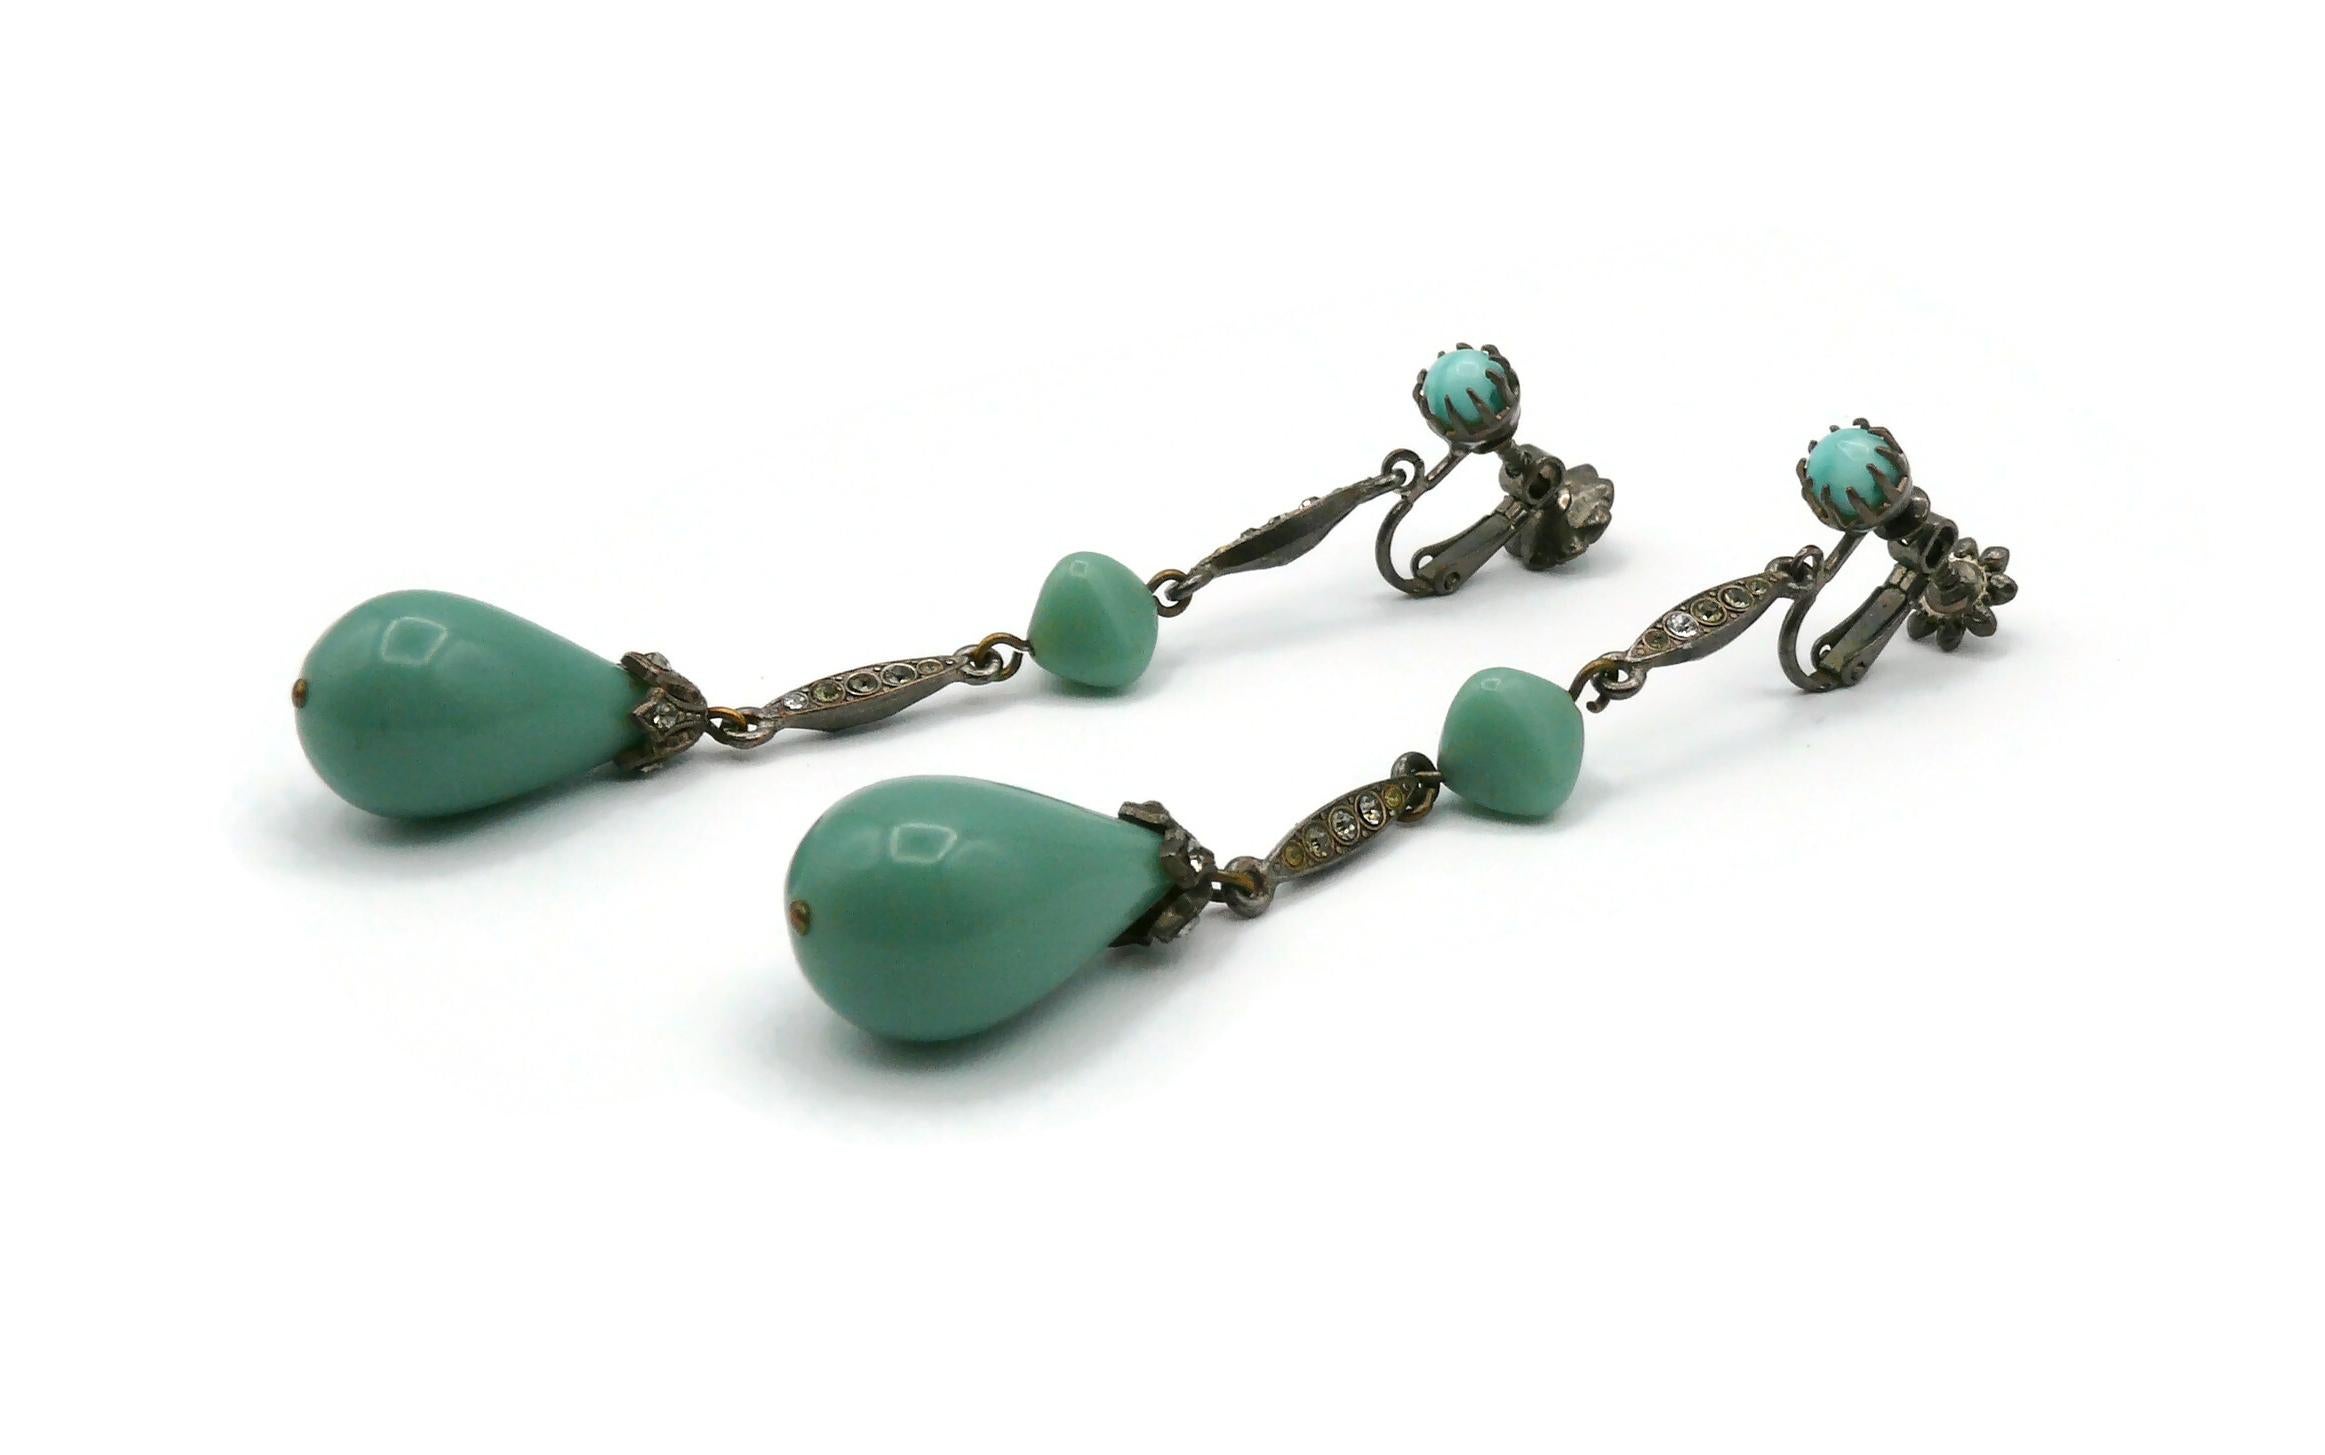 Christian Dior Boutique Vintage Victorian Insipred Faux Jade Dangling Earrings For Sale 2